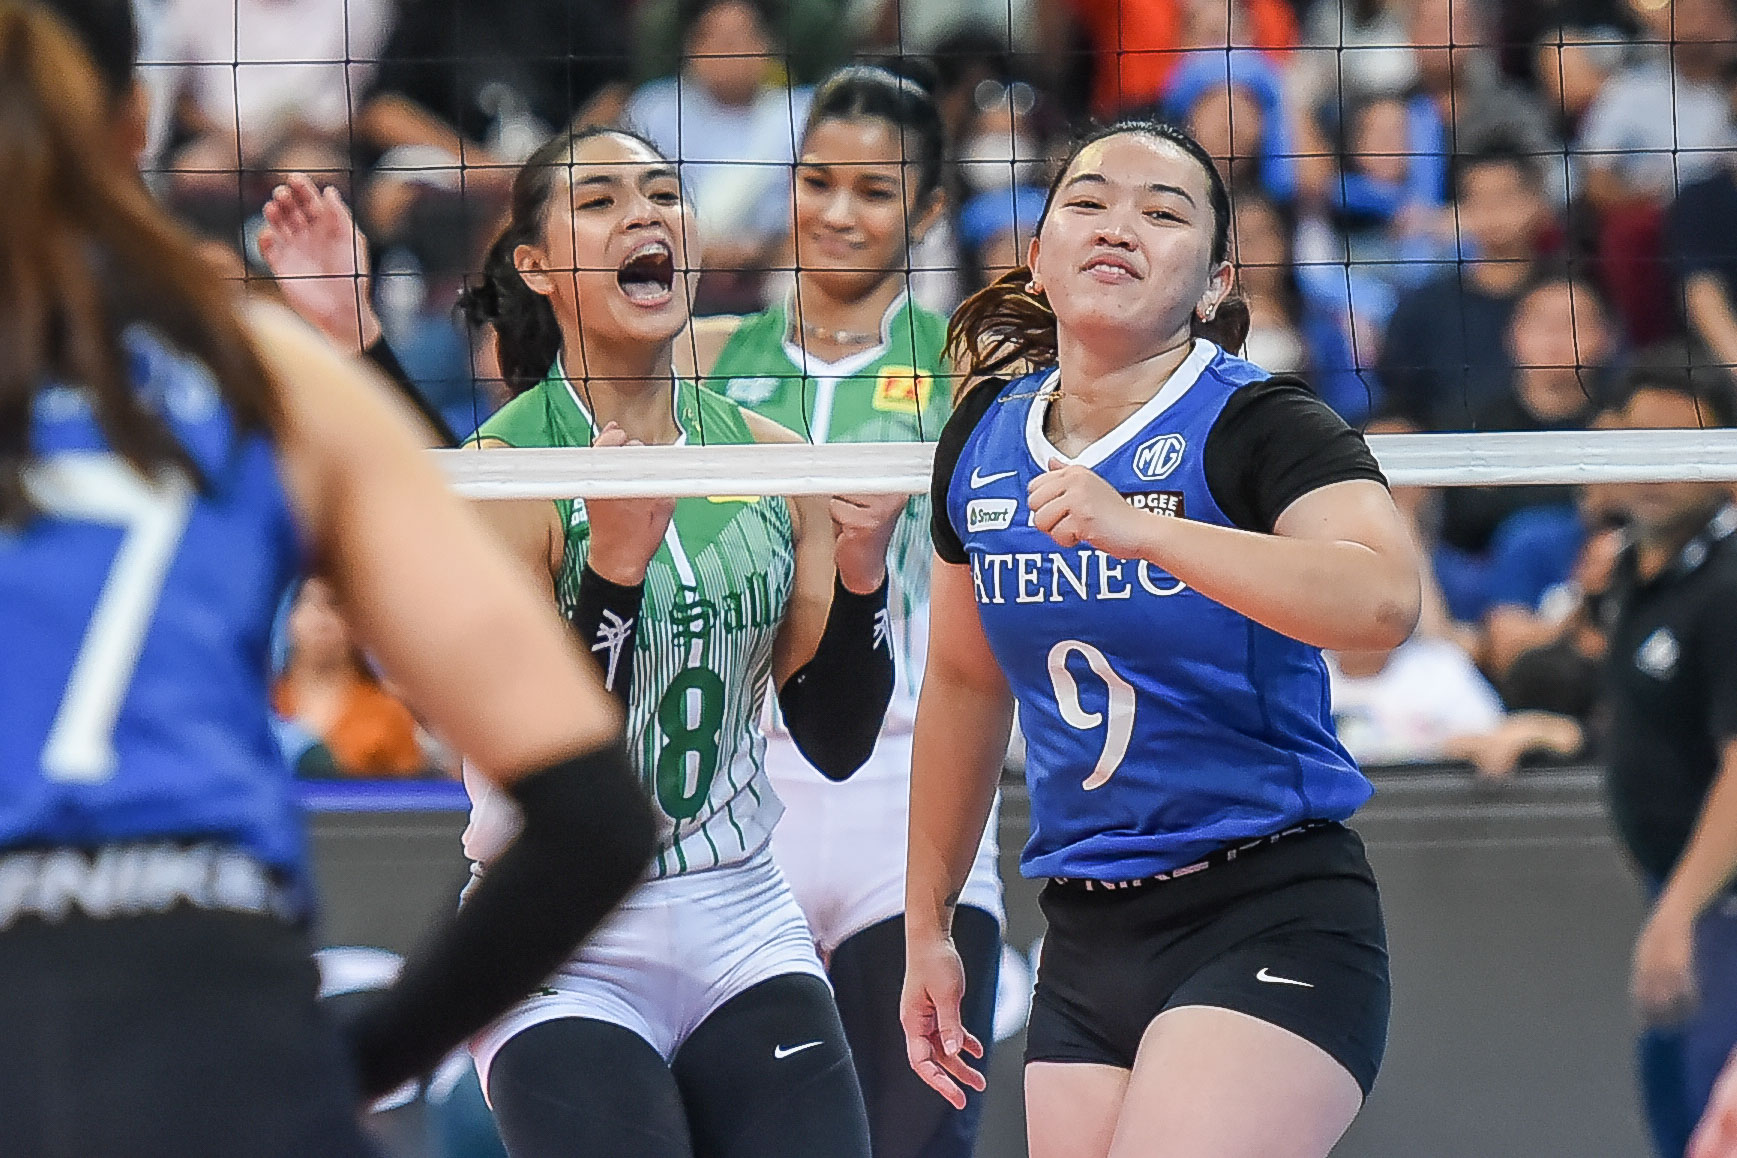 UAAP-85-WVB-DLSU-vs.-ADMU-Jolina-Dela-Cruz-8281 From track and field to volleyball: Angel Canino proud of Shevana Laput's rise DLSU News UAAP Volleyball  - philippine sports news